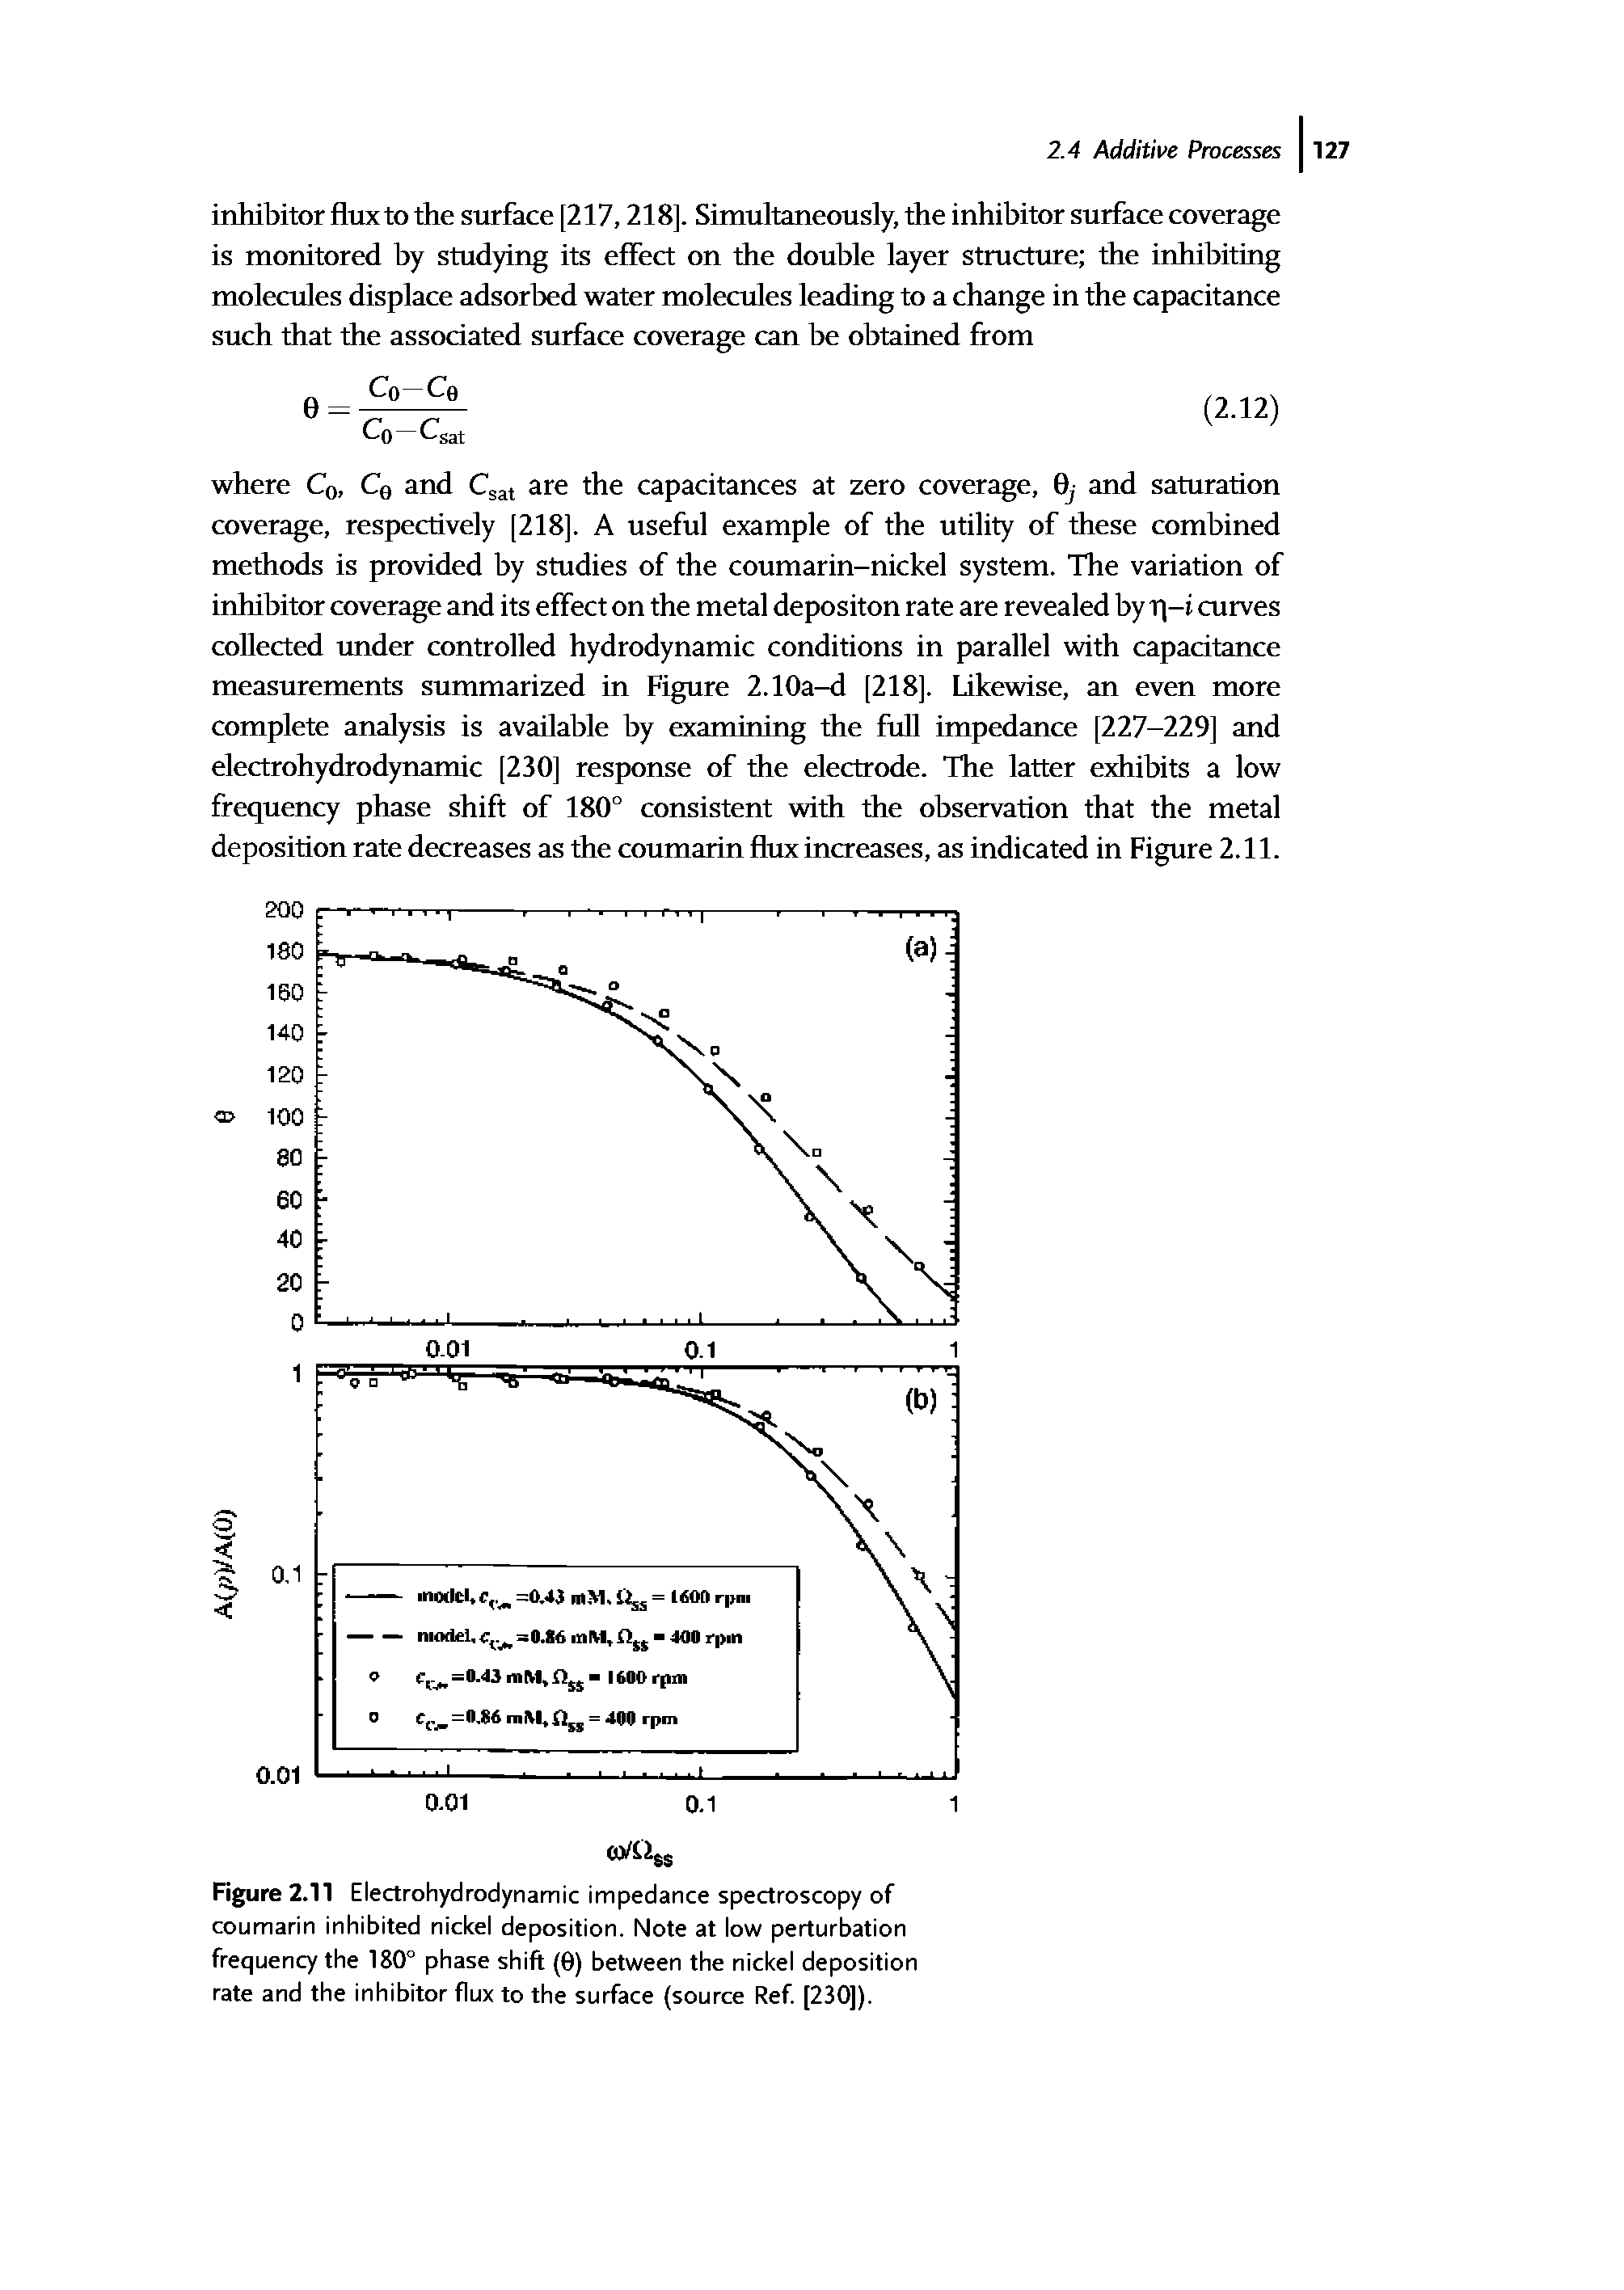 Figure 2.11 Electrohydrodynamic impedance spectroscopy of coumarin inhibited nickel deposition. Note at low perturbation frequency the 180° phase shift (0) between the nickel deposition rate and the inhibitor flux to the surface (source Ref. [230]).